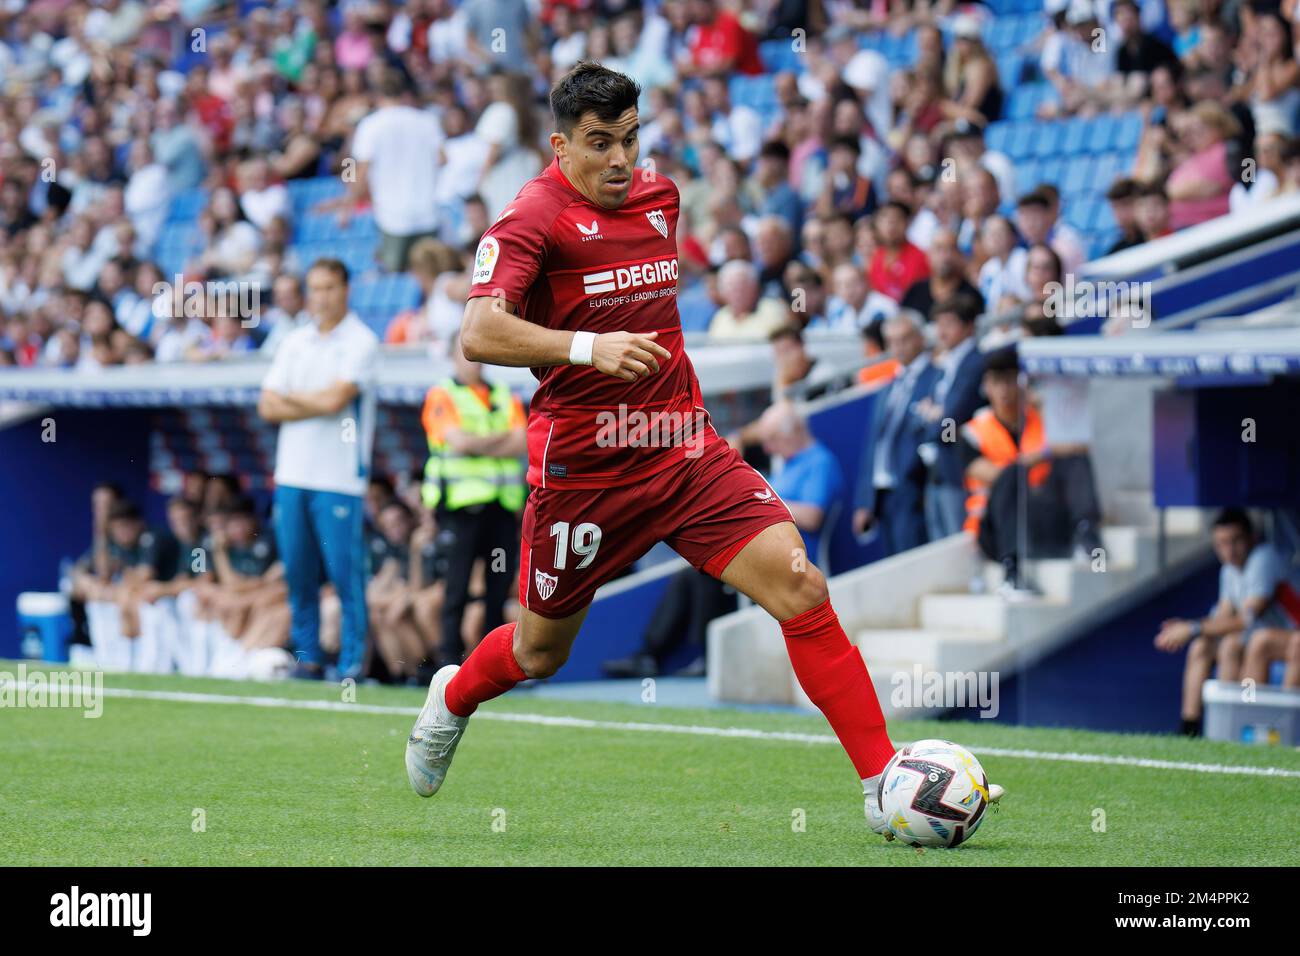 BARCELONA - SEP 10: Marcos Acuna in action at the La Liga match between RCD Espanyol and Sevilla CF at the RCDE Stadium on September 10, 2022 in Barce Stock Photo